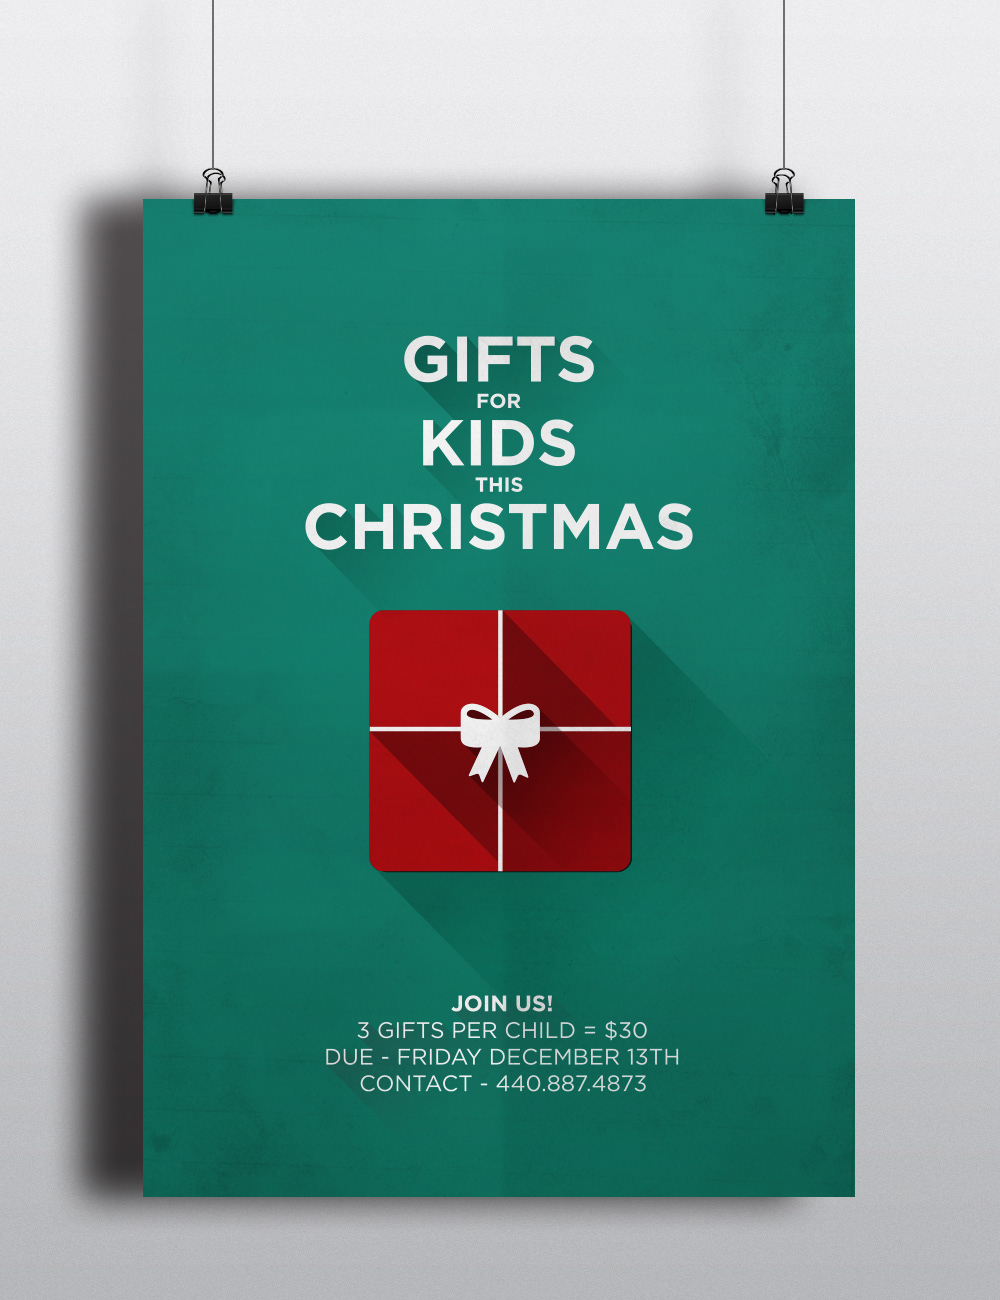 flat flat design icons Icon long shadow Holiday Christmas posters print Illustrator adobe non profit flyers flyer